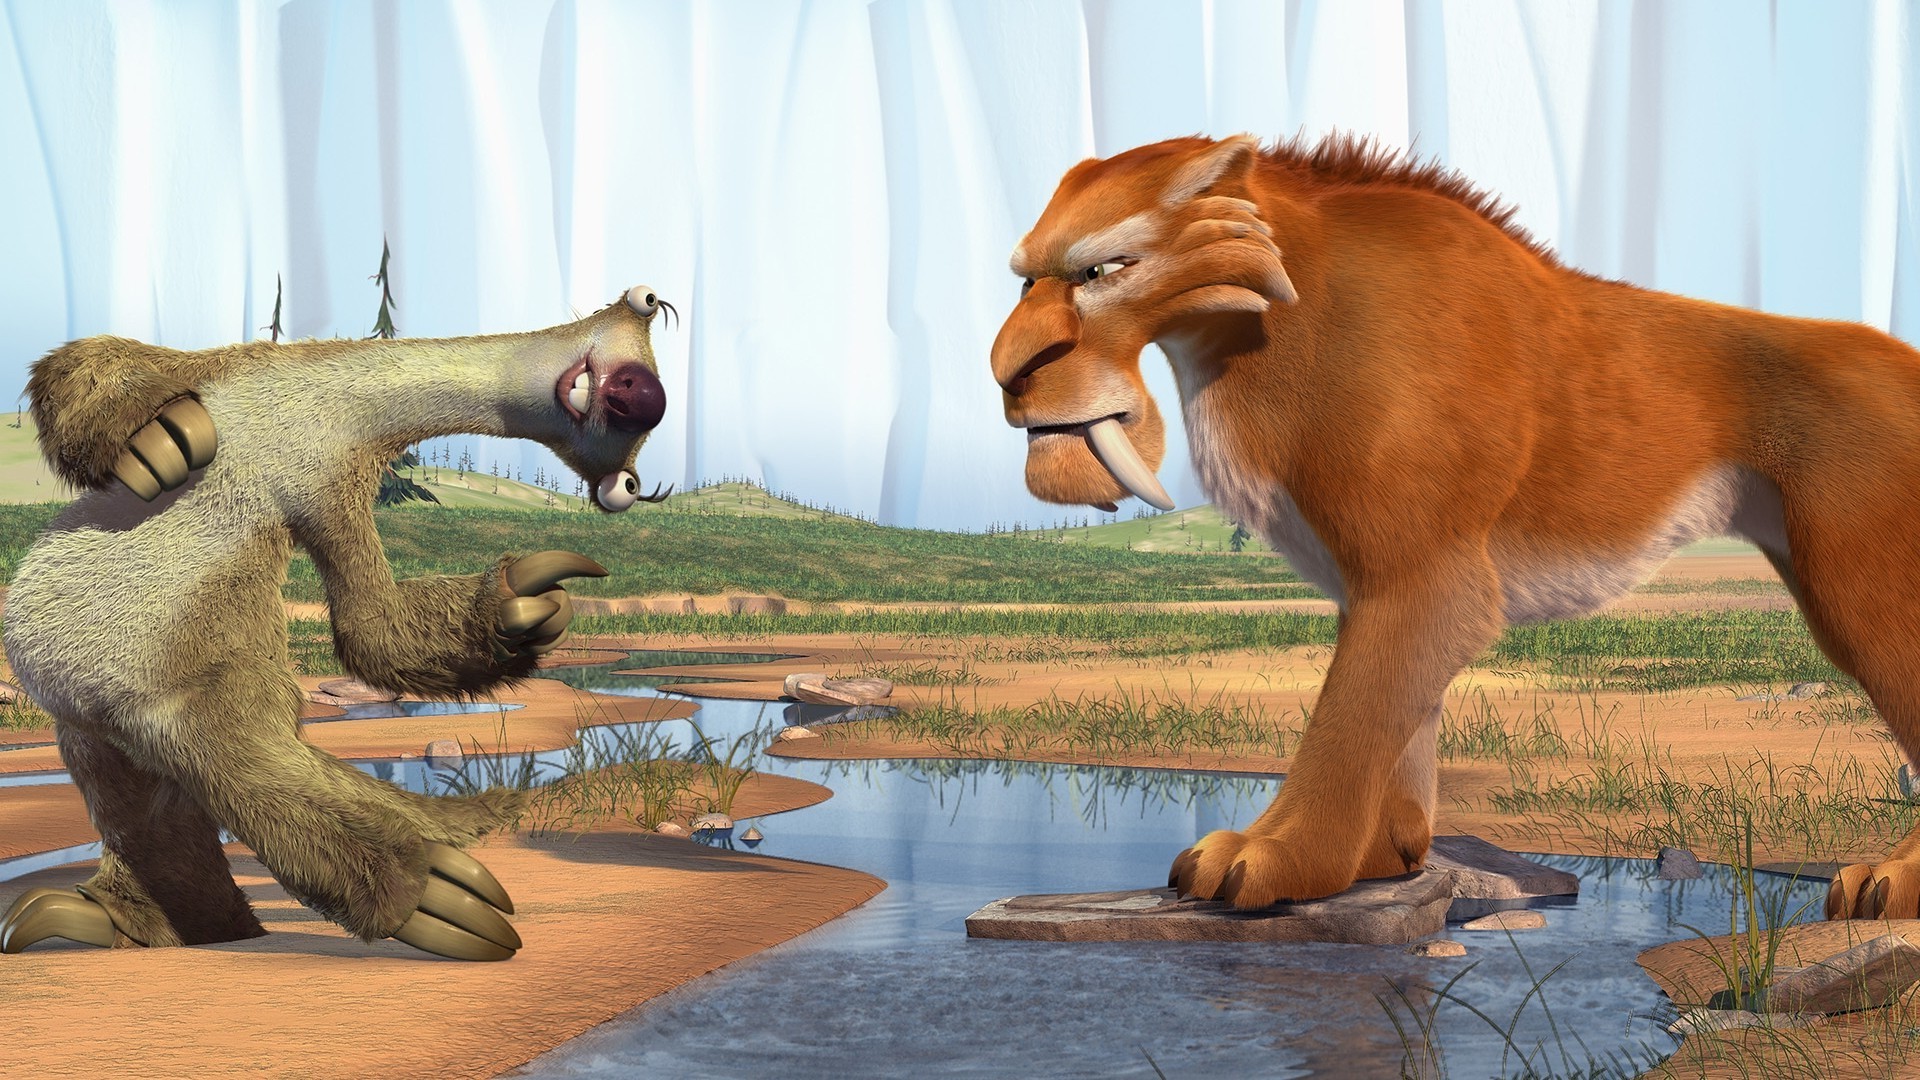 movies, Ice Age, Ice Age: The Meltdown Wallpaper